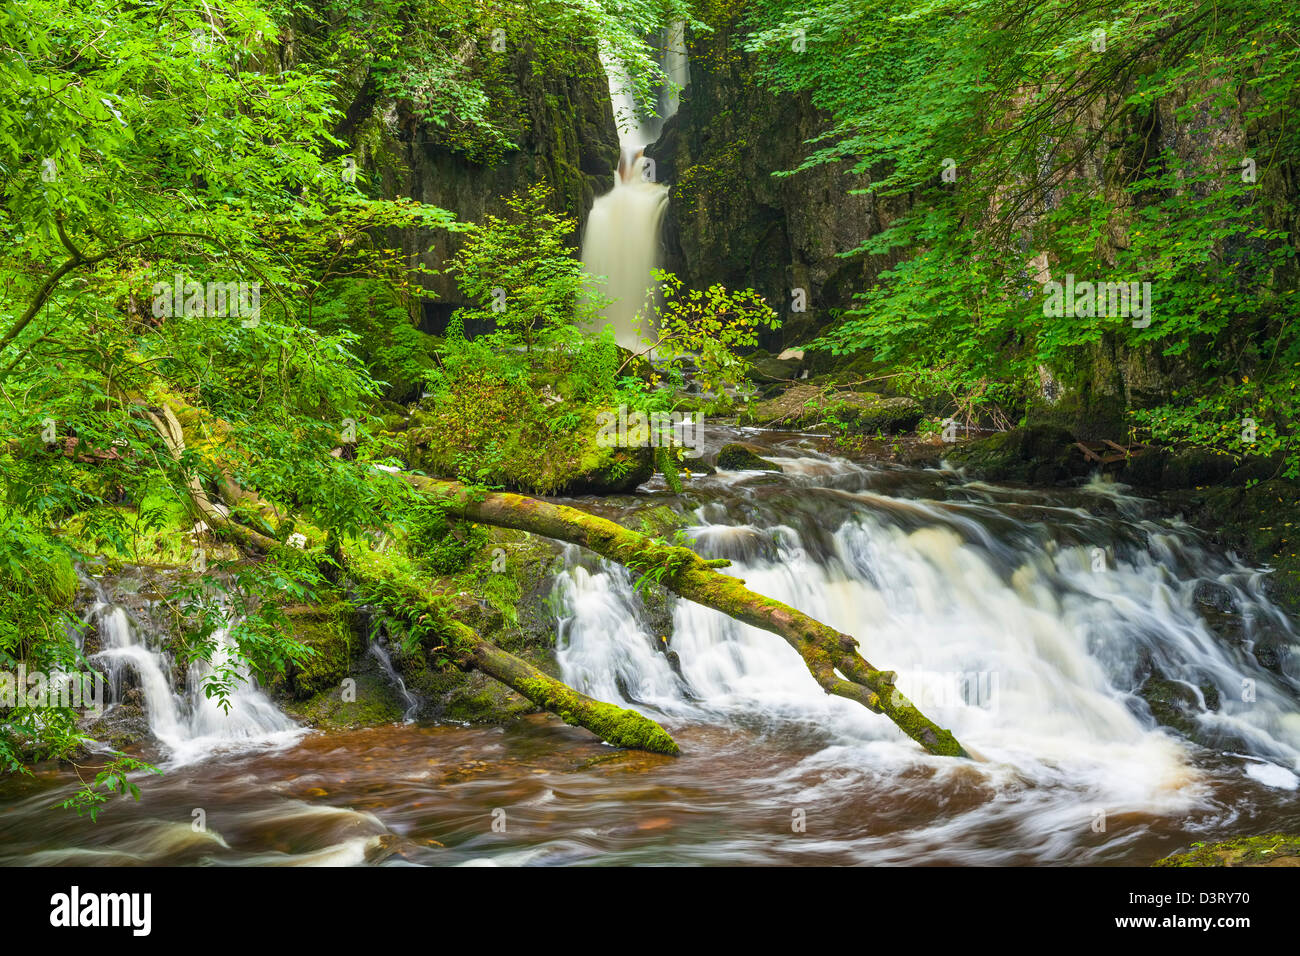 Catrigg force near Stainforth in North Yorkshire. Stock Photo